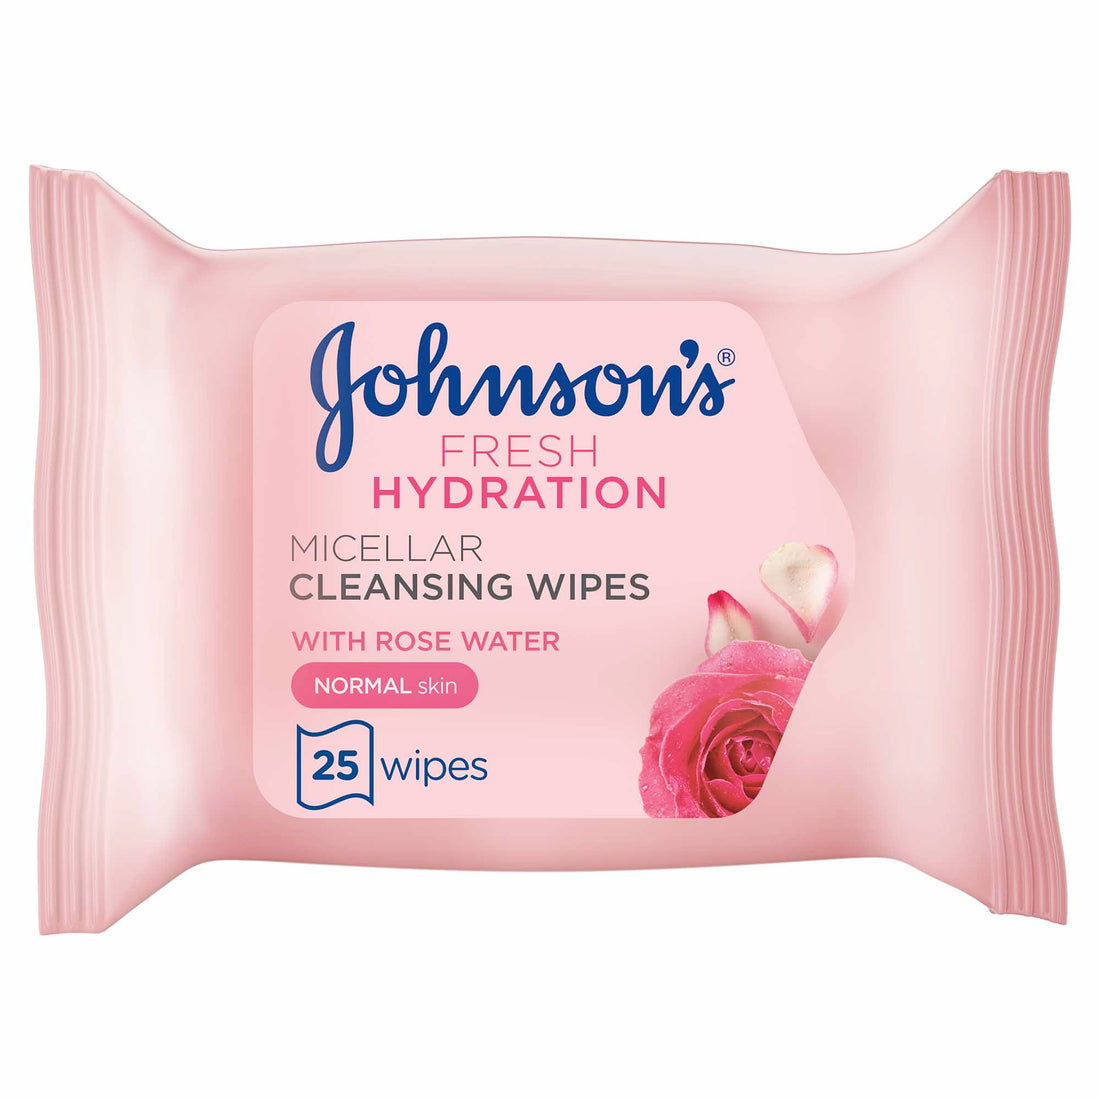 JOHNSON’S Cleansing Face Wipes, Fresh Hydration Micellar, Normal Skin, Pack of 25 wipes